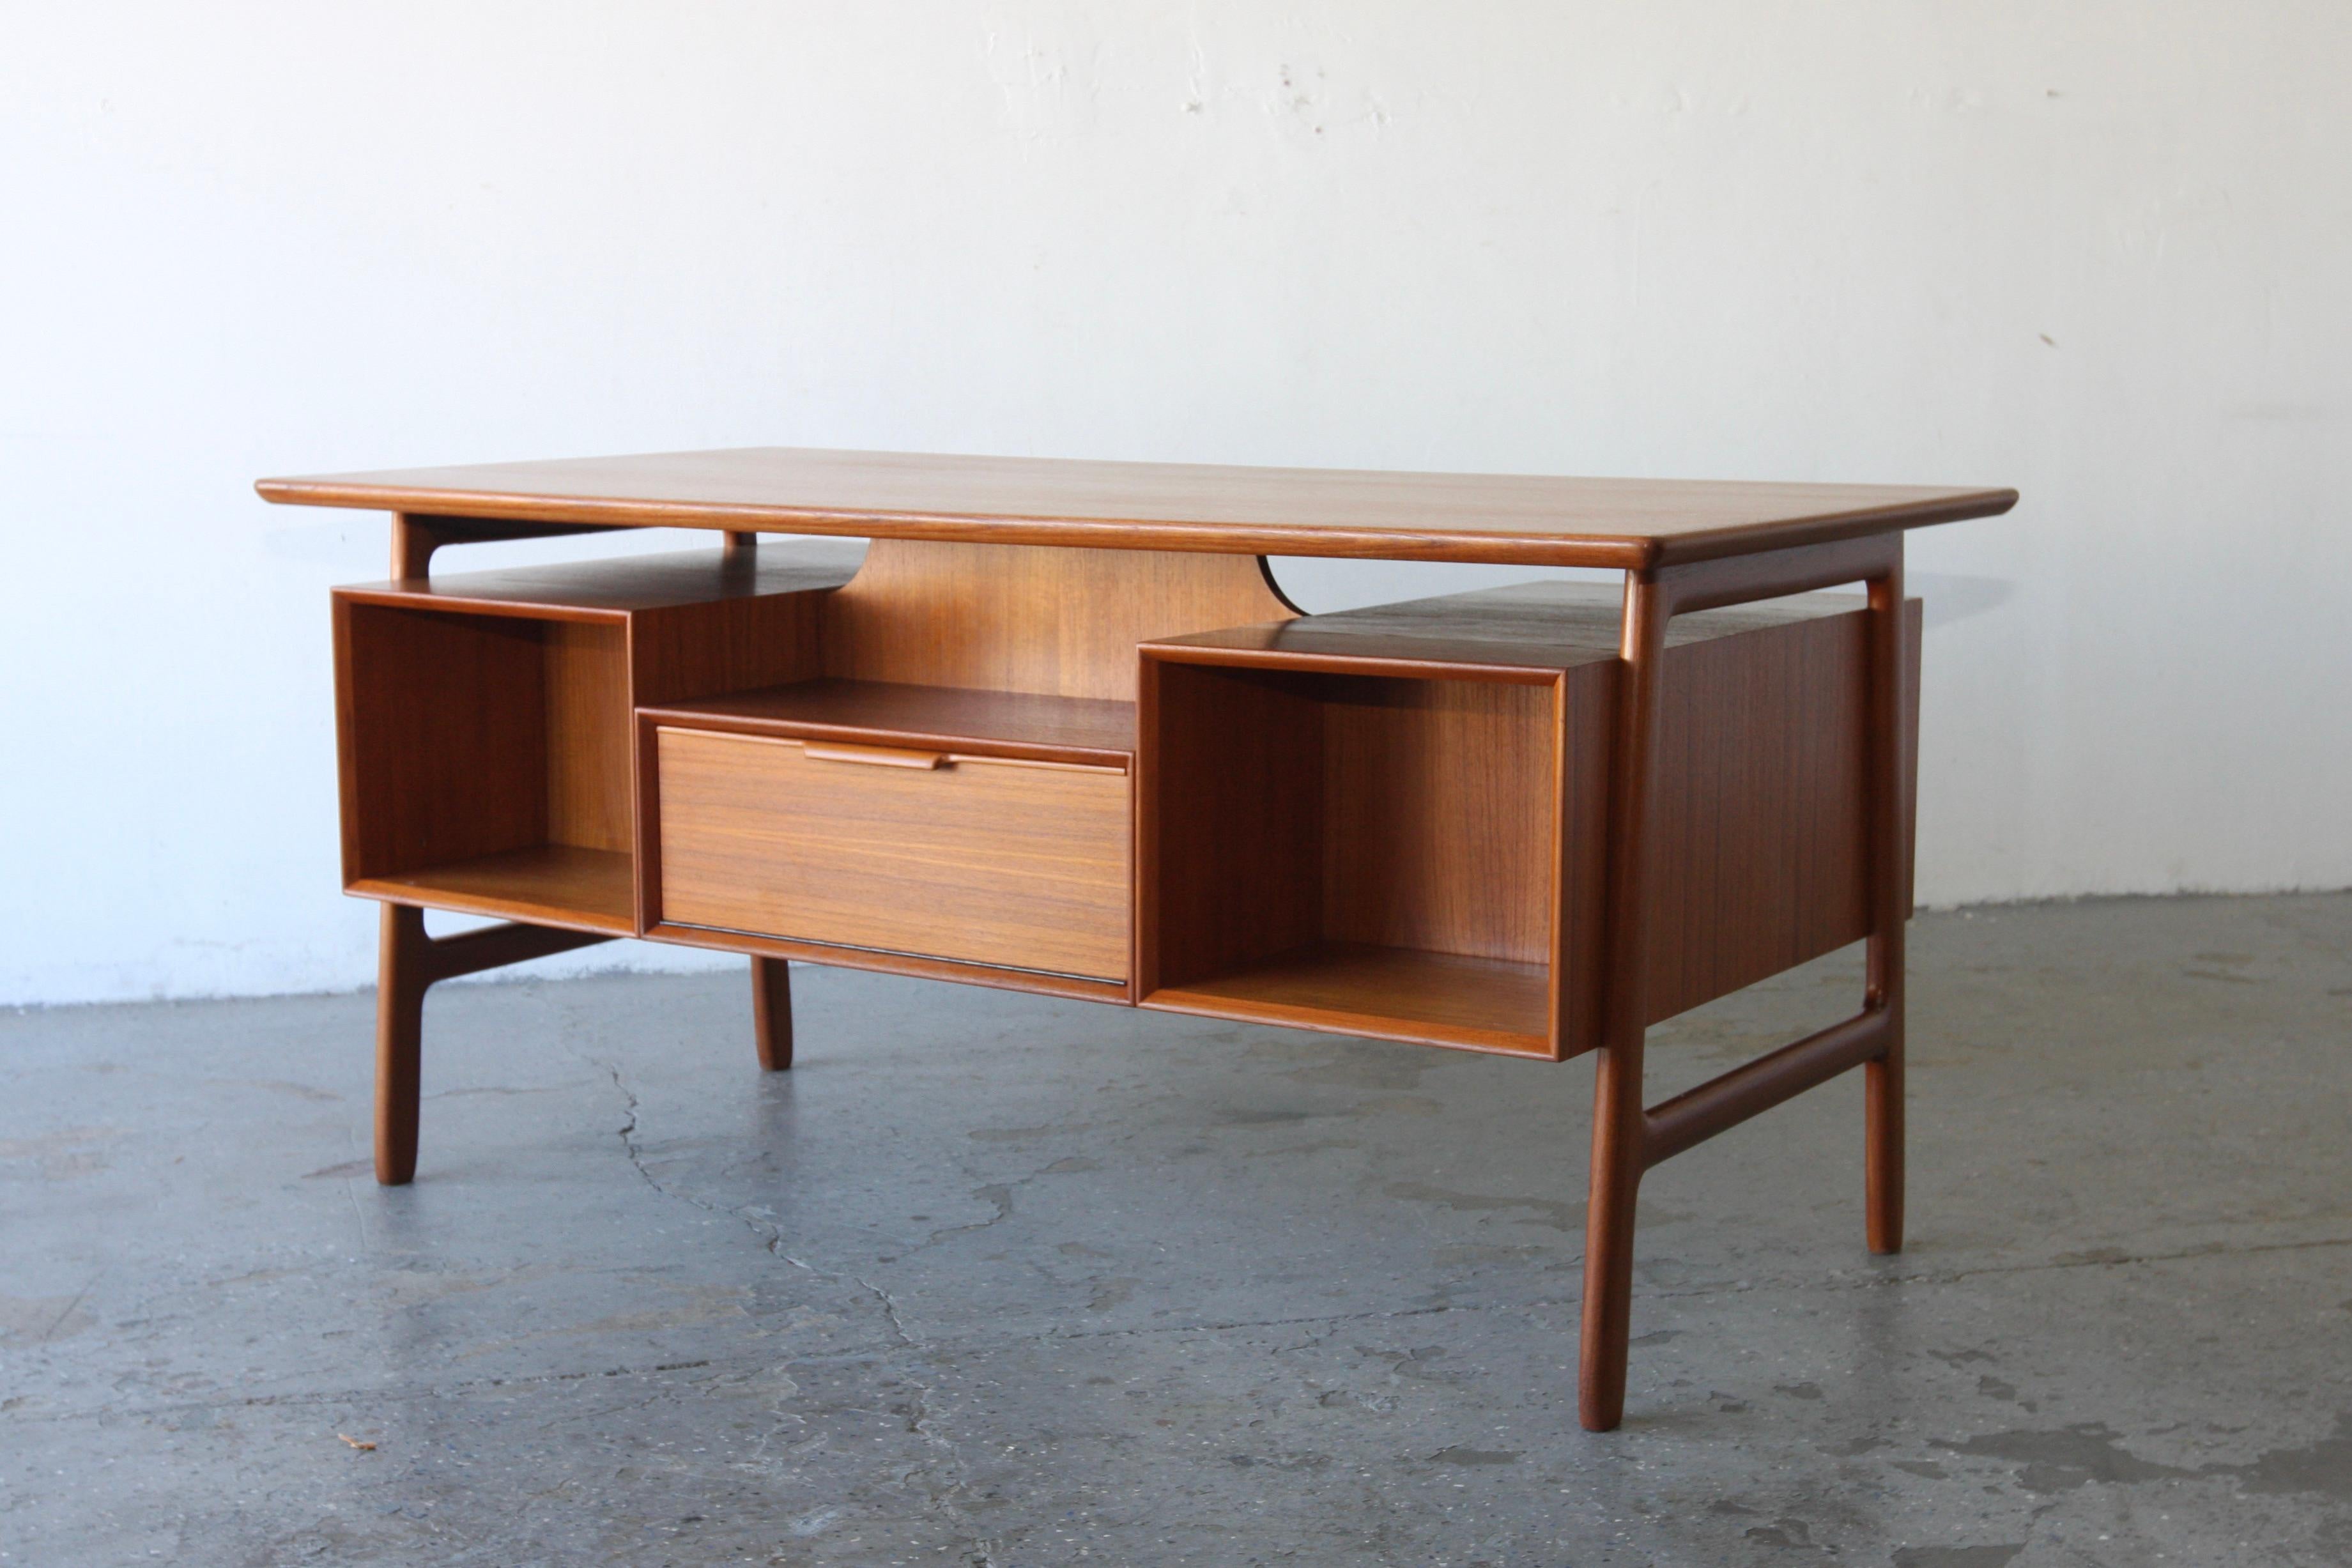 Gunni Omann Model #75 Desk for Omann Jun Mobelfabrik

Beautiful Danish floating top teak desk by Gunni Omann design Model #75 for Omann Jun, Denmark.
It is exquisitely made desk using high quality teak. The construction and materials are top notch